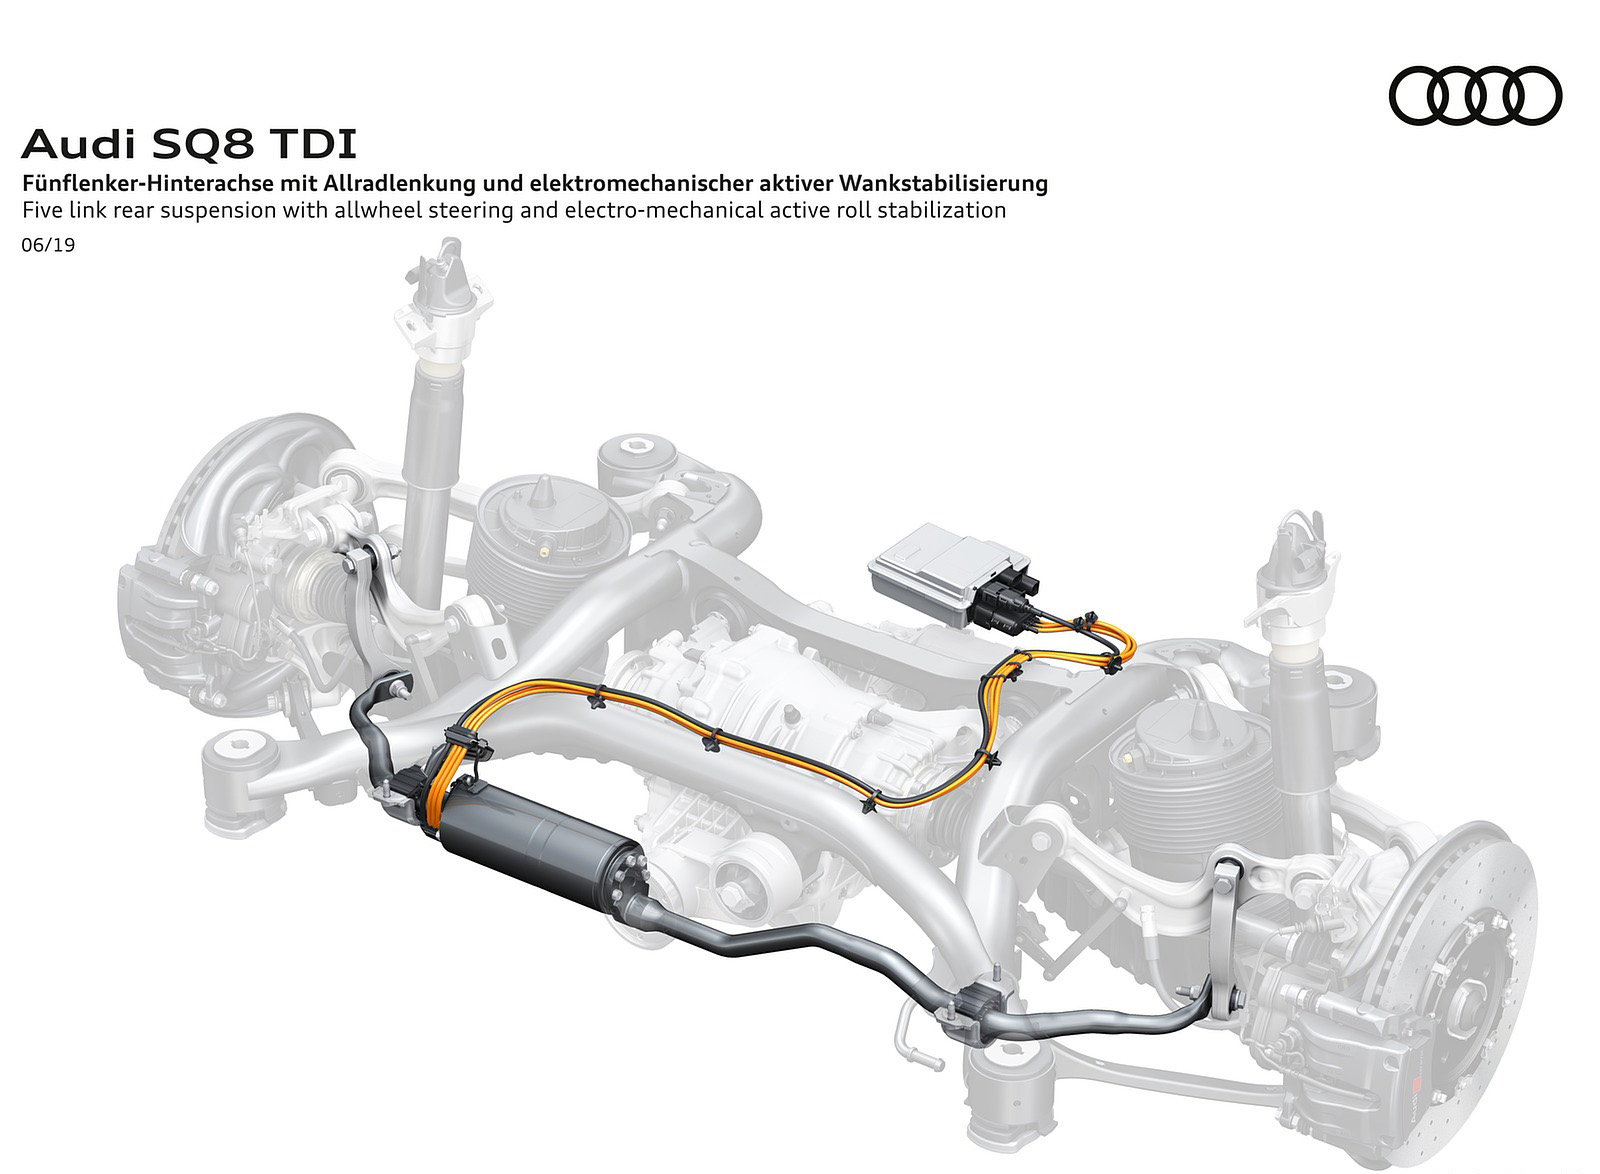 2020 Audi SQ8 TDI Five link rear suspension with allwheel steering and electro-mechanical active roll stabilization Wallpapers  #66 of 140